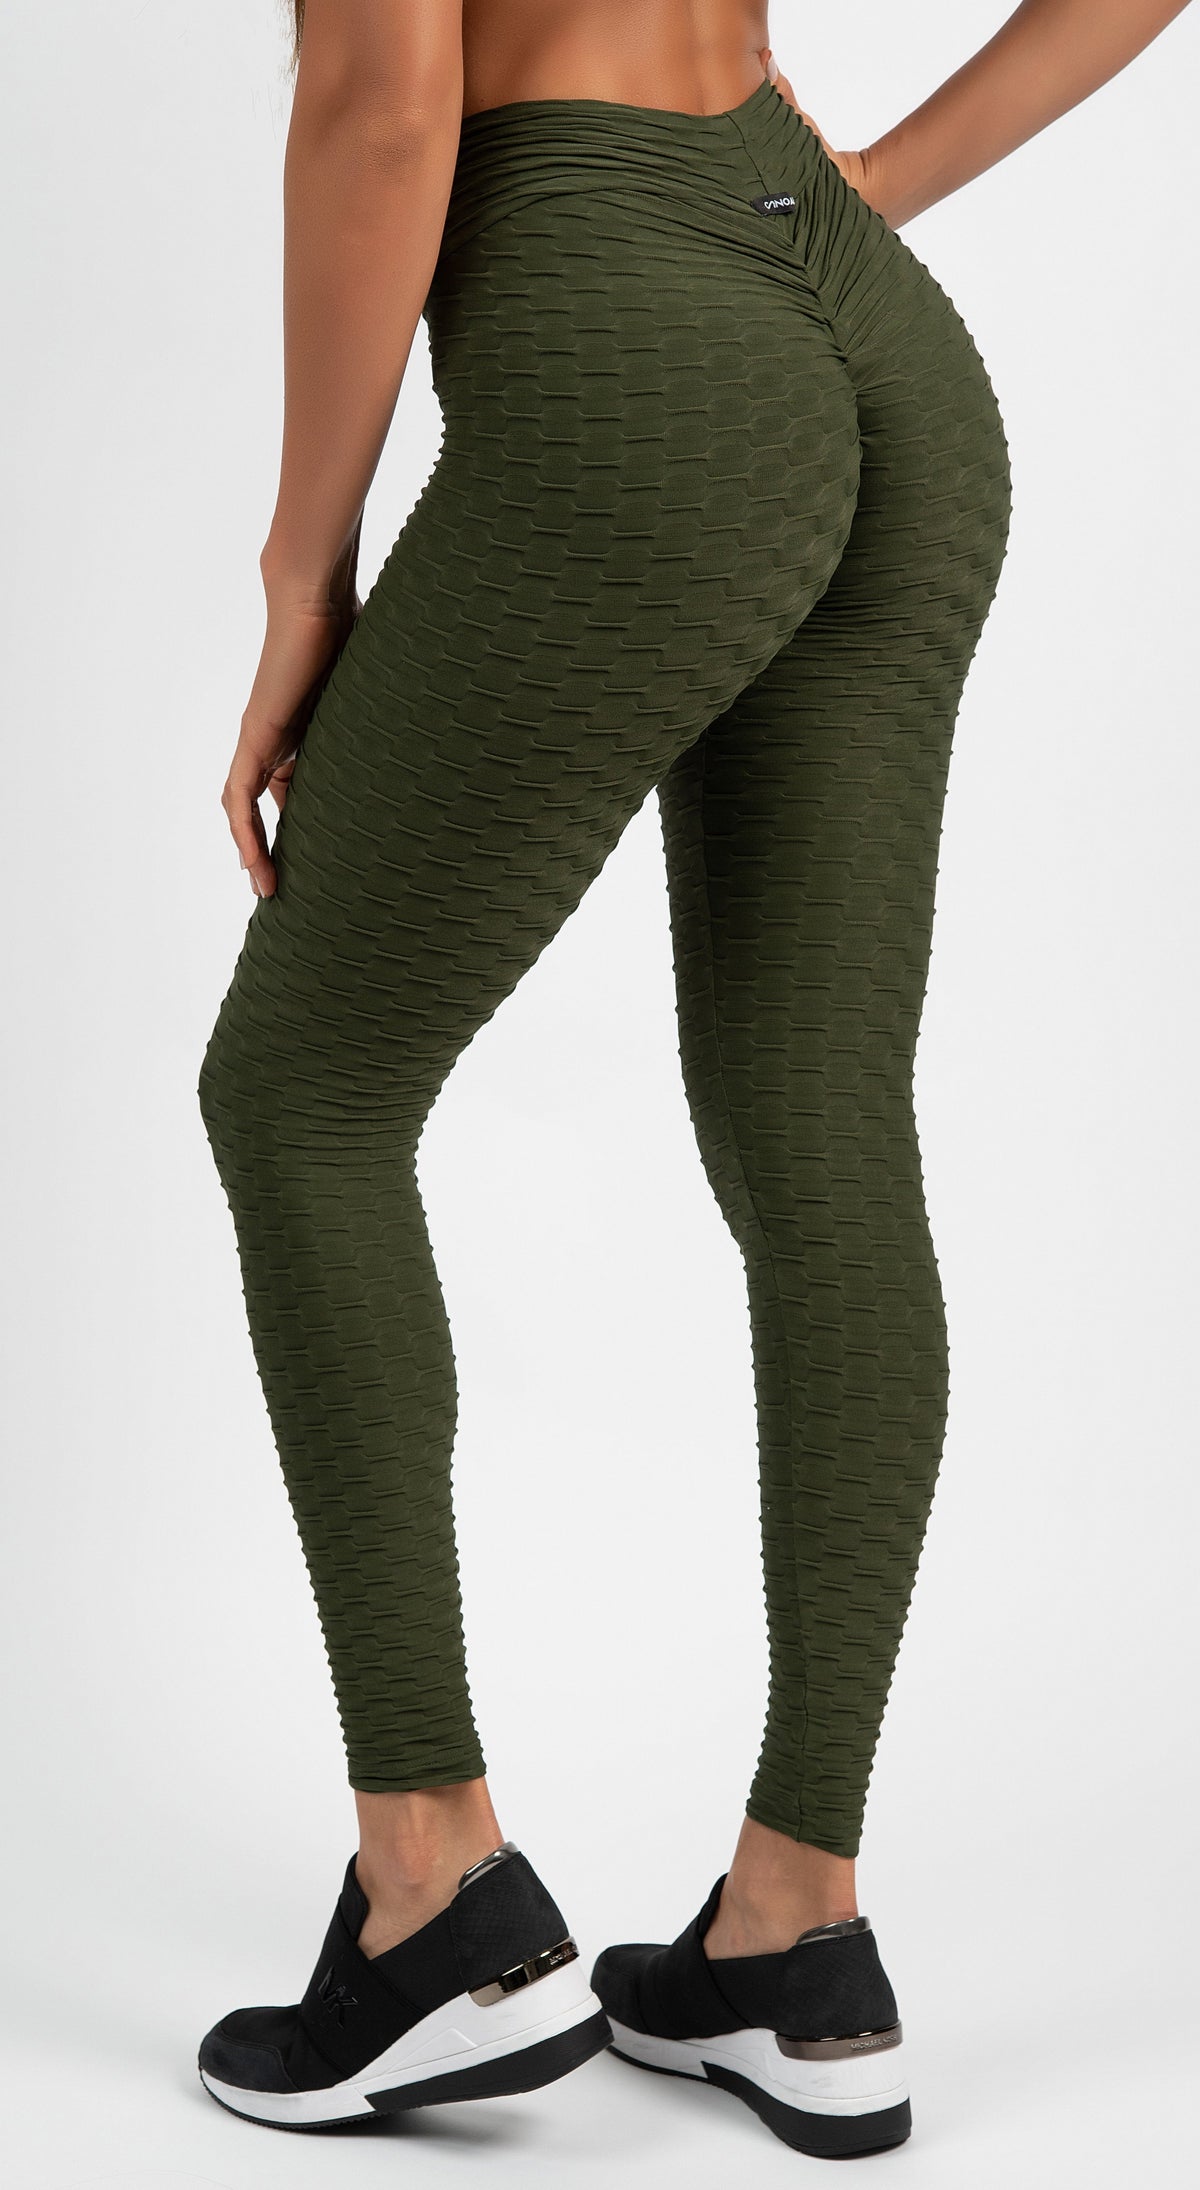 Women's Two Piece Sustainable Activewear Outfit: Olive Green High Rise  Leggings and Workout Top | Workout clothes, High rise leggings, Clothes